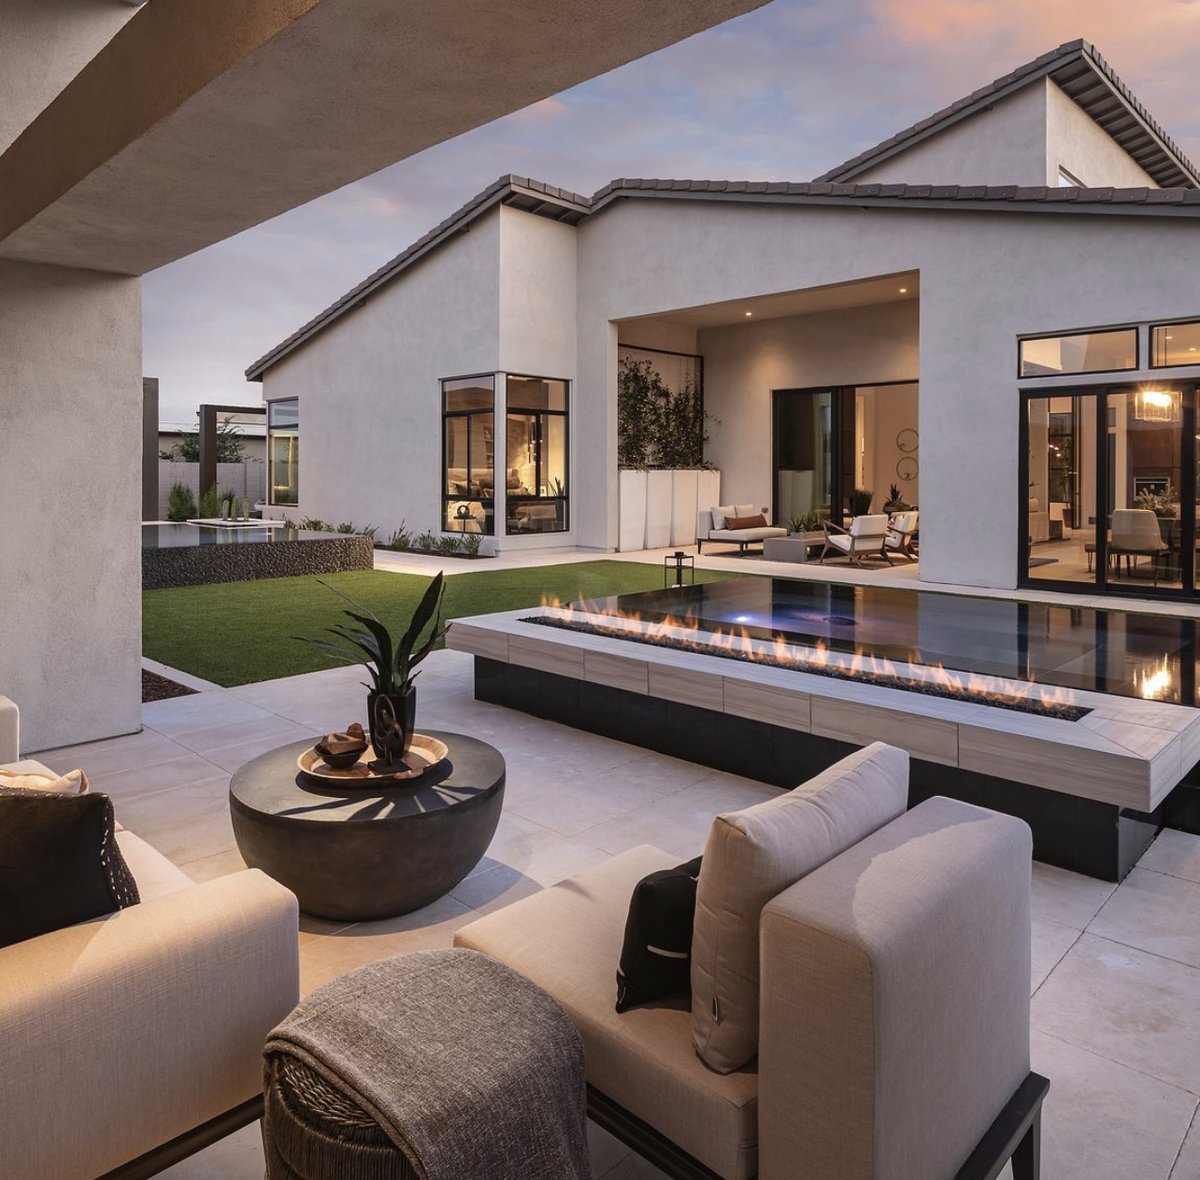 Your backyard can be an architectural achievement whether you're basking in the sun or gazing at the stars. . . . #luxuryliving #luxuryhome #luxurylandscaping #landscaping